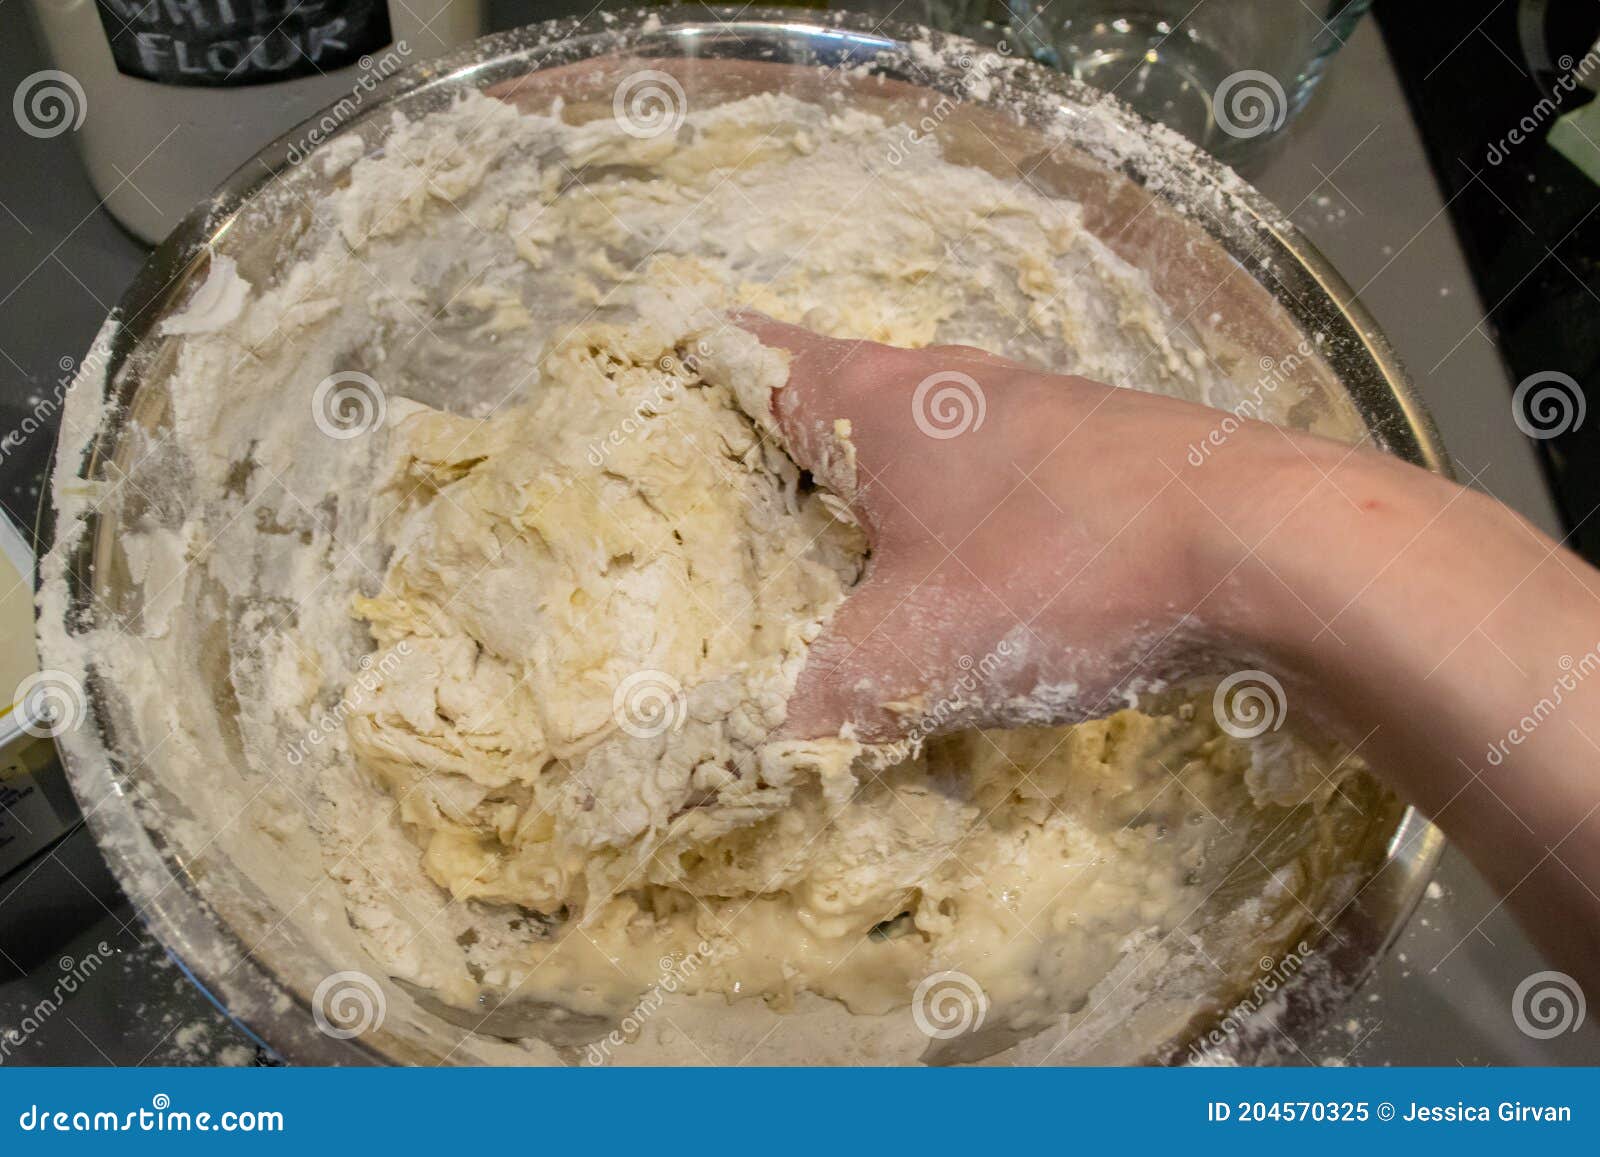 Bowl of mixing dough in messy kitchen - Stock Image - F005/2392